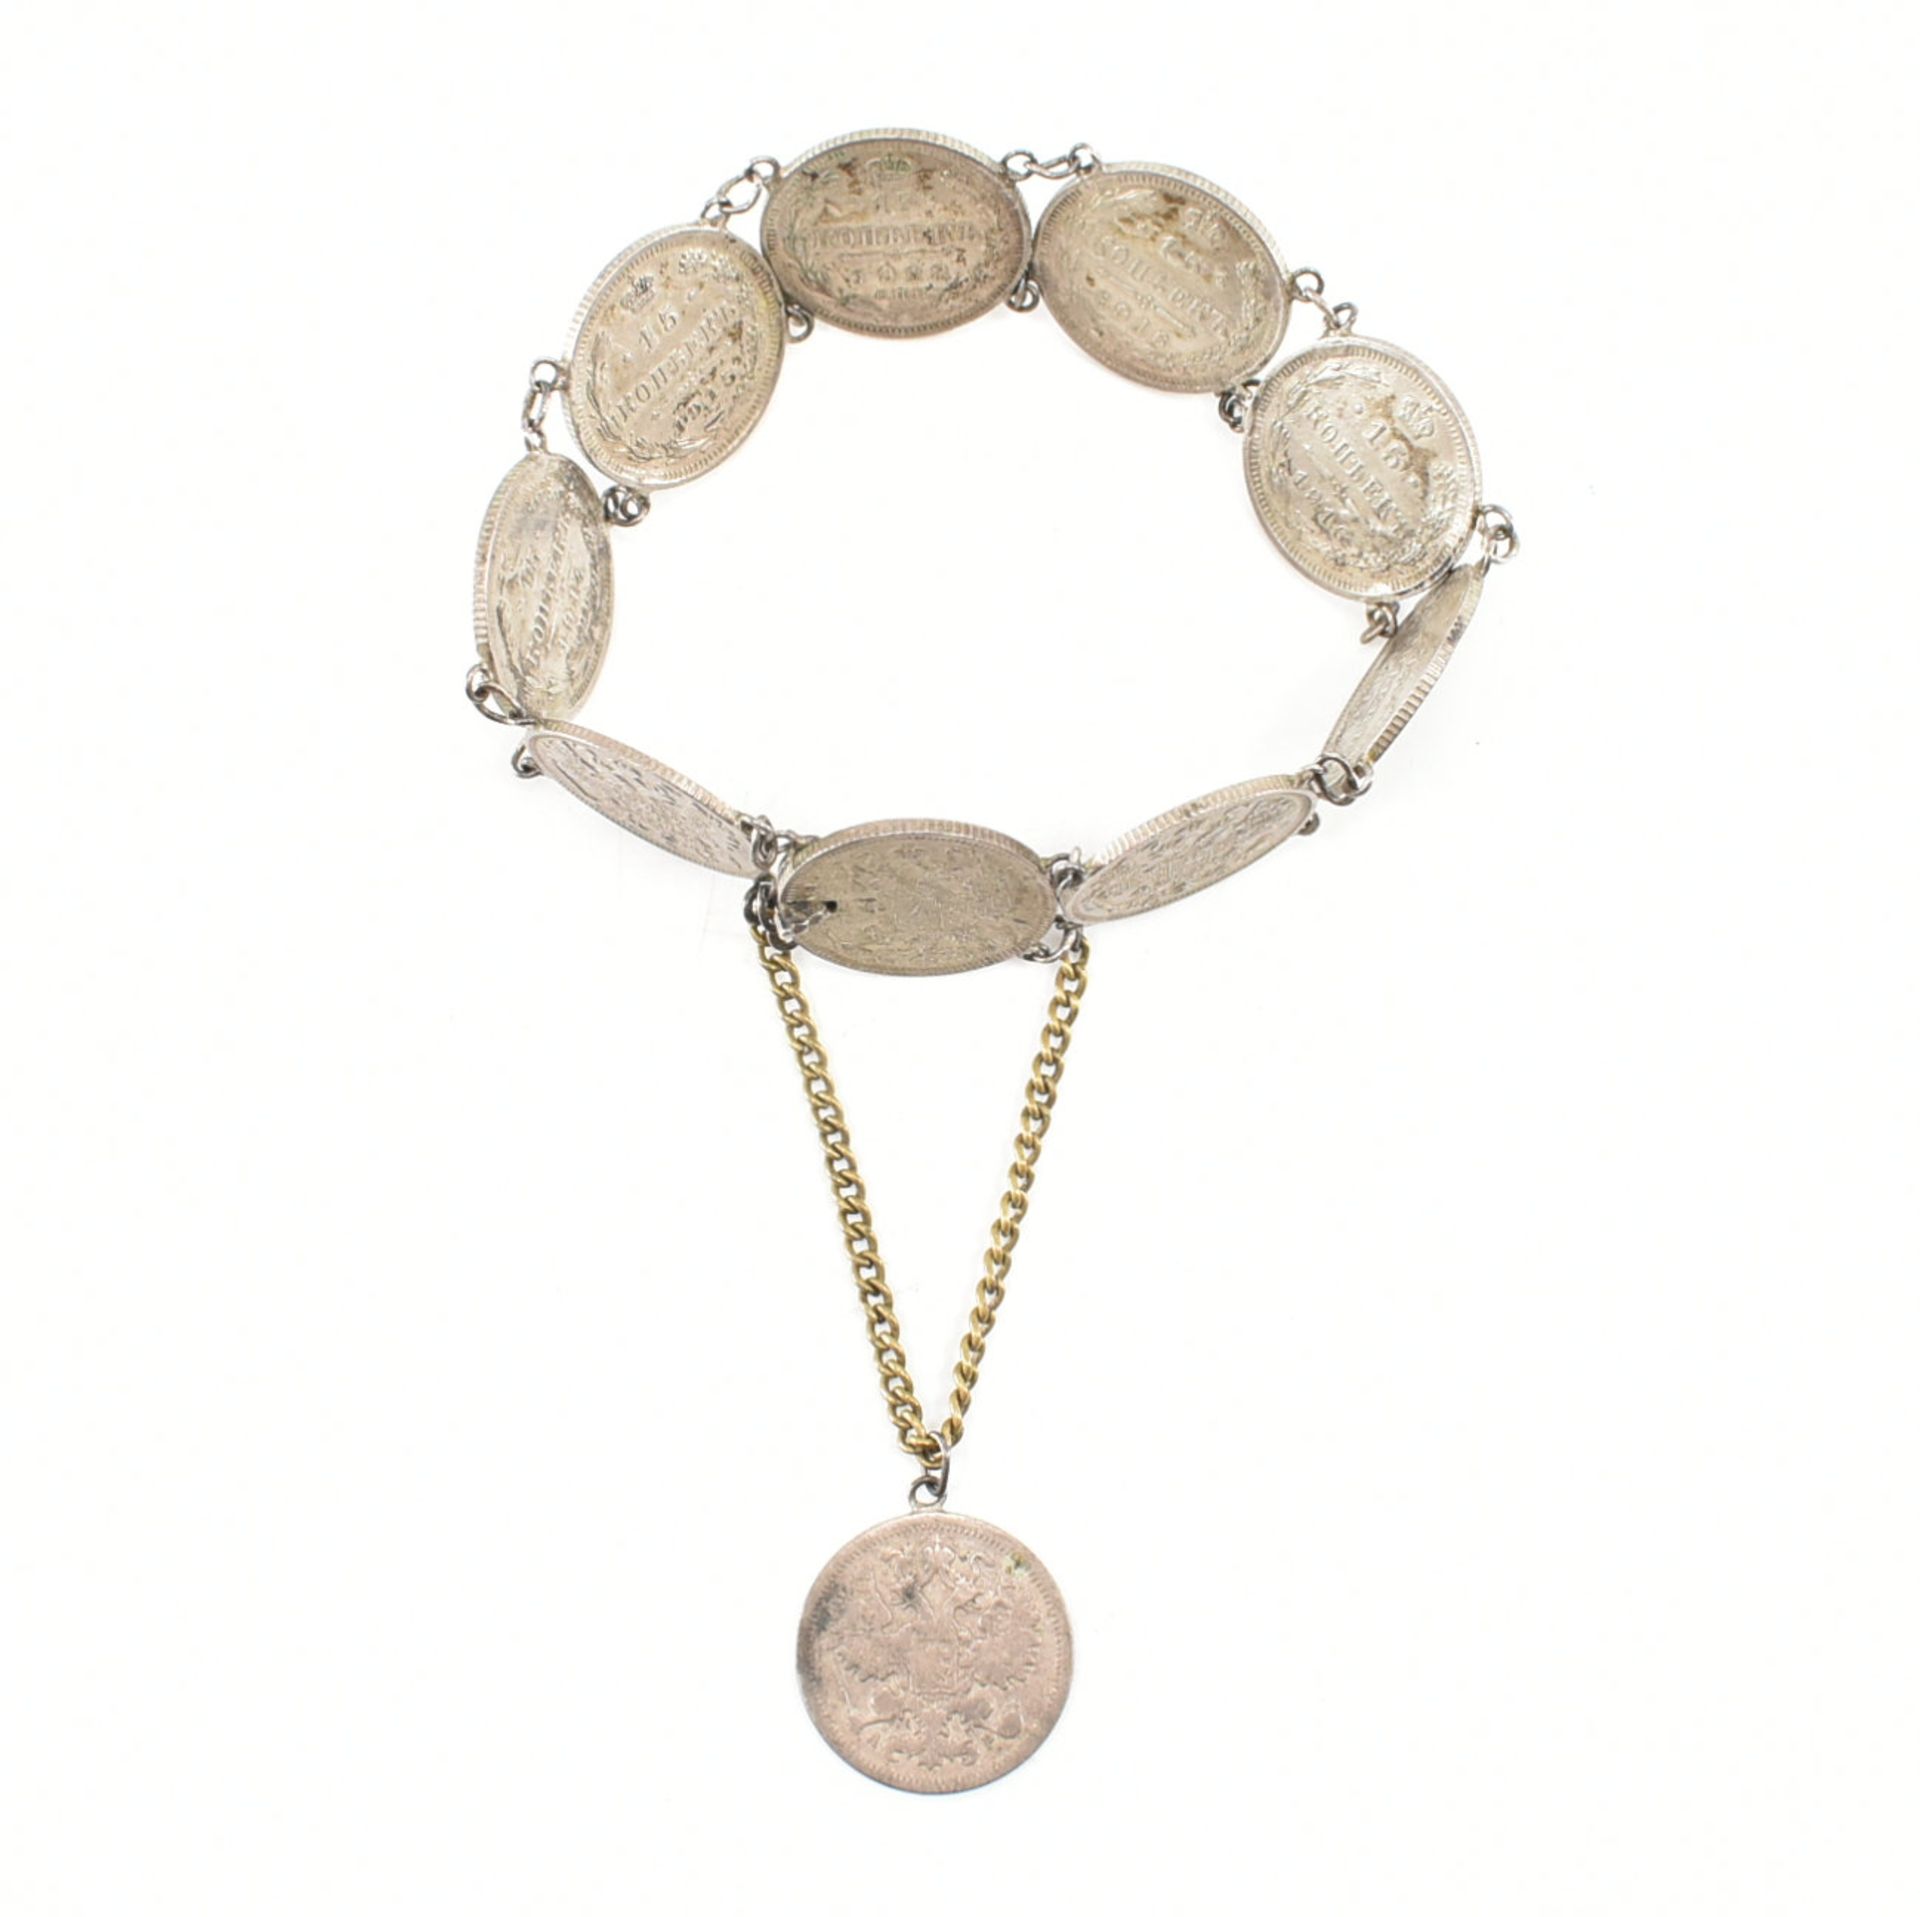 VINTAGE RUSSIAN WHITE METAL ROUBLE COIN BRACELET